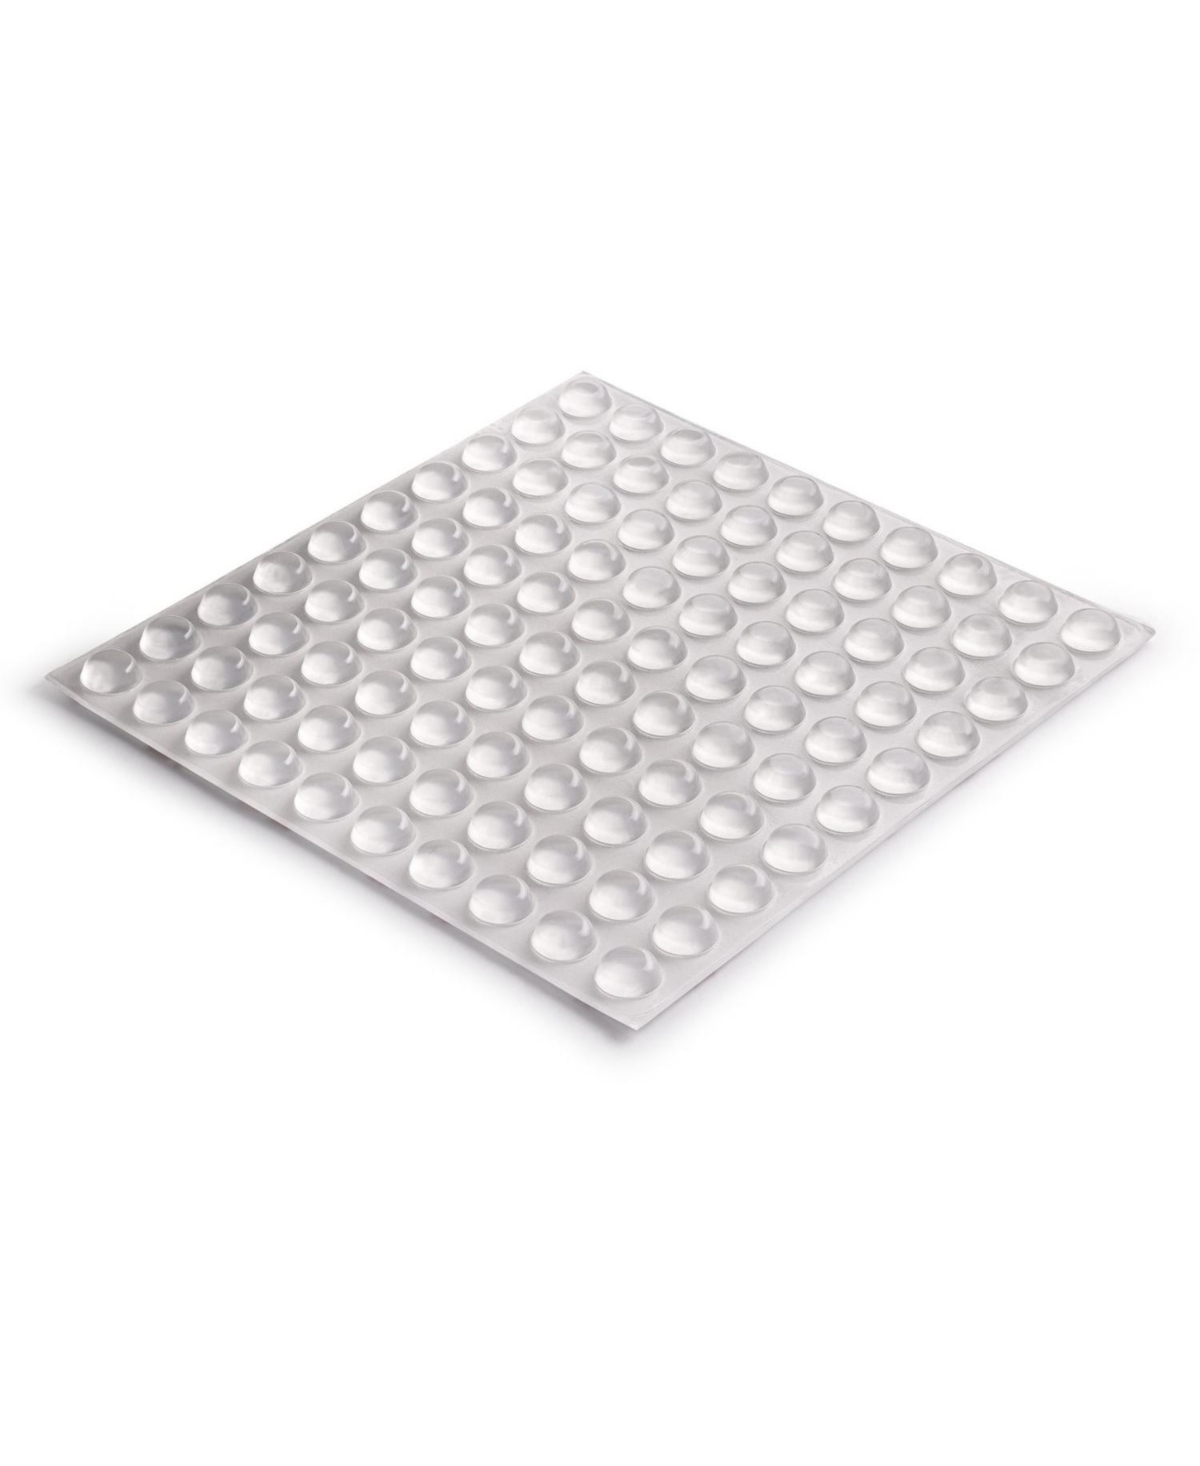 Cabinet Bumpers Clear Adhesive Pads 150-Pc.